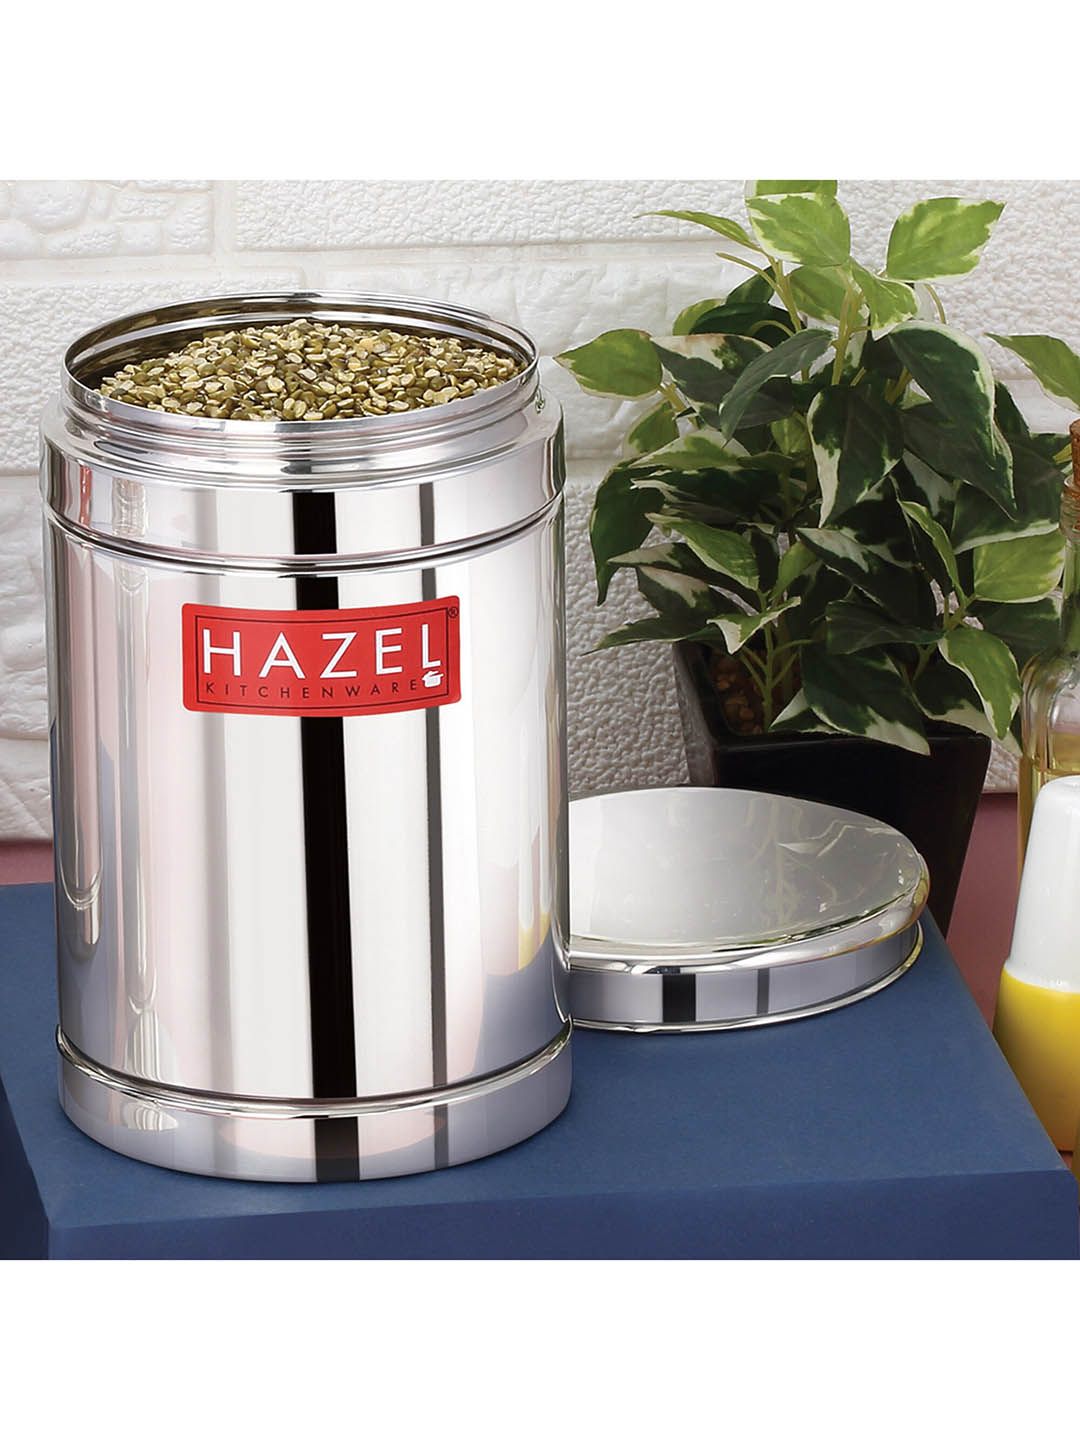 HAZEL Silver-Toned Round Stainless Steel Airtight Container Price in India